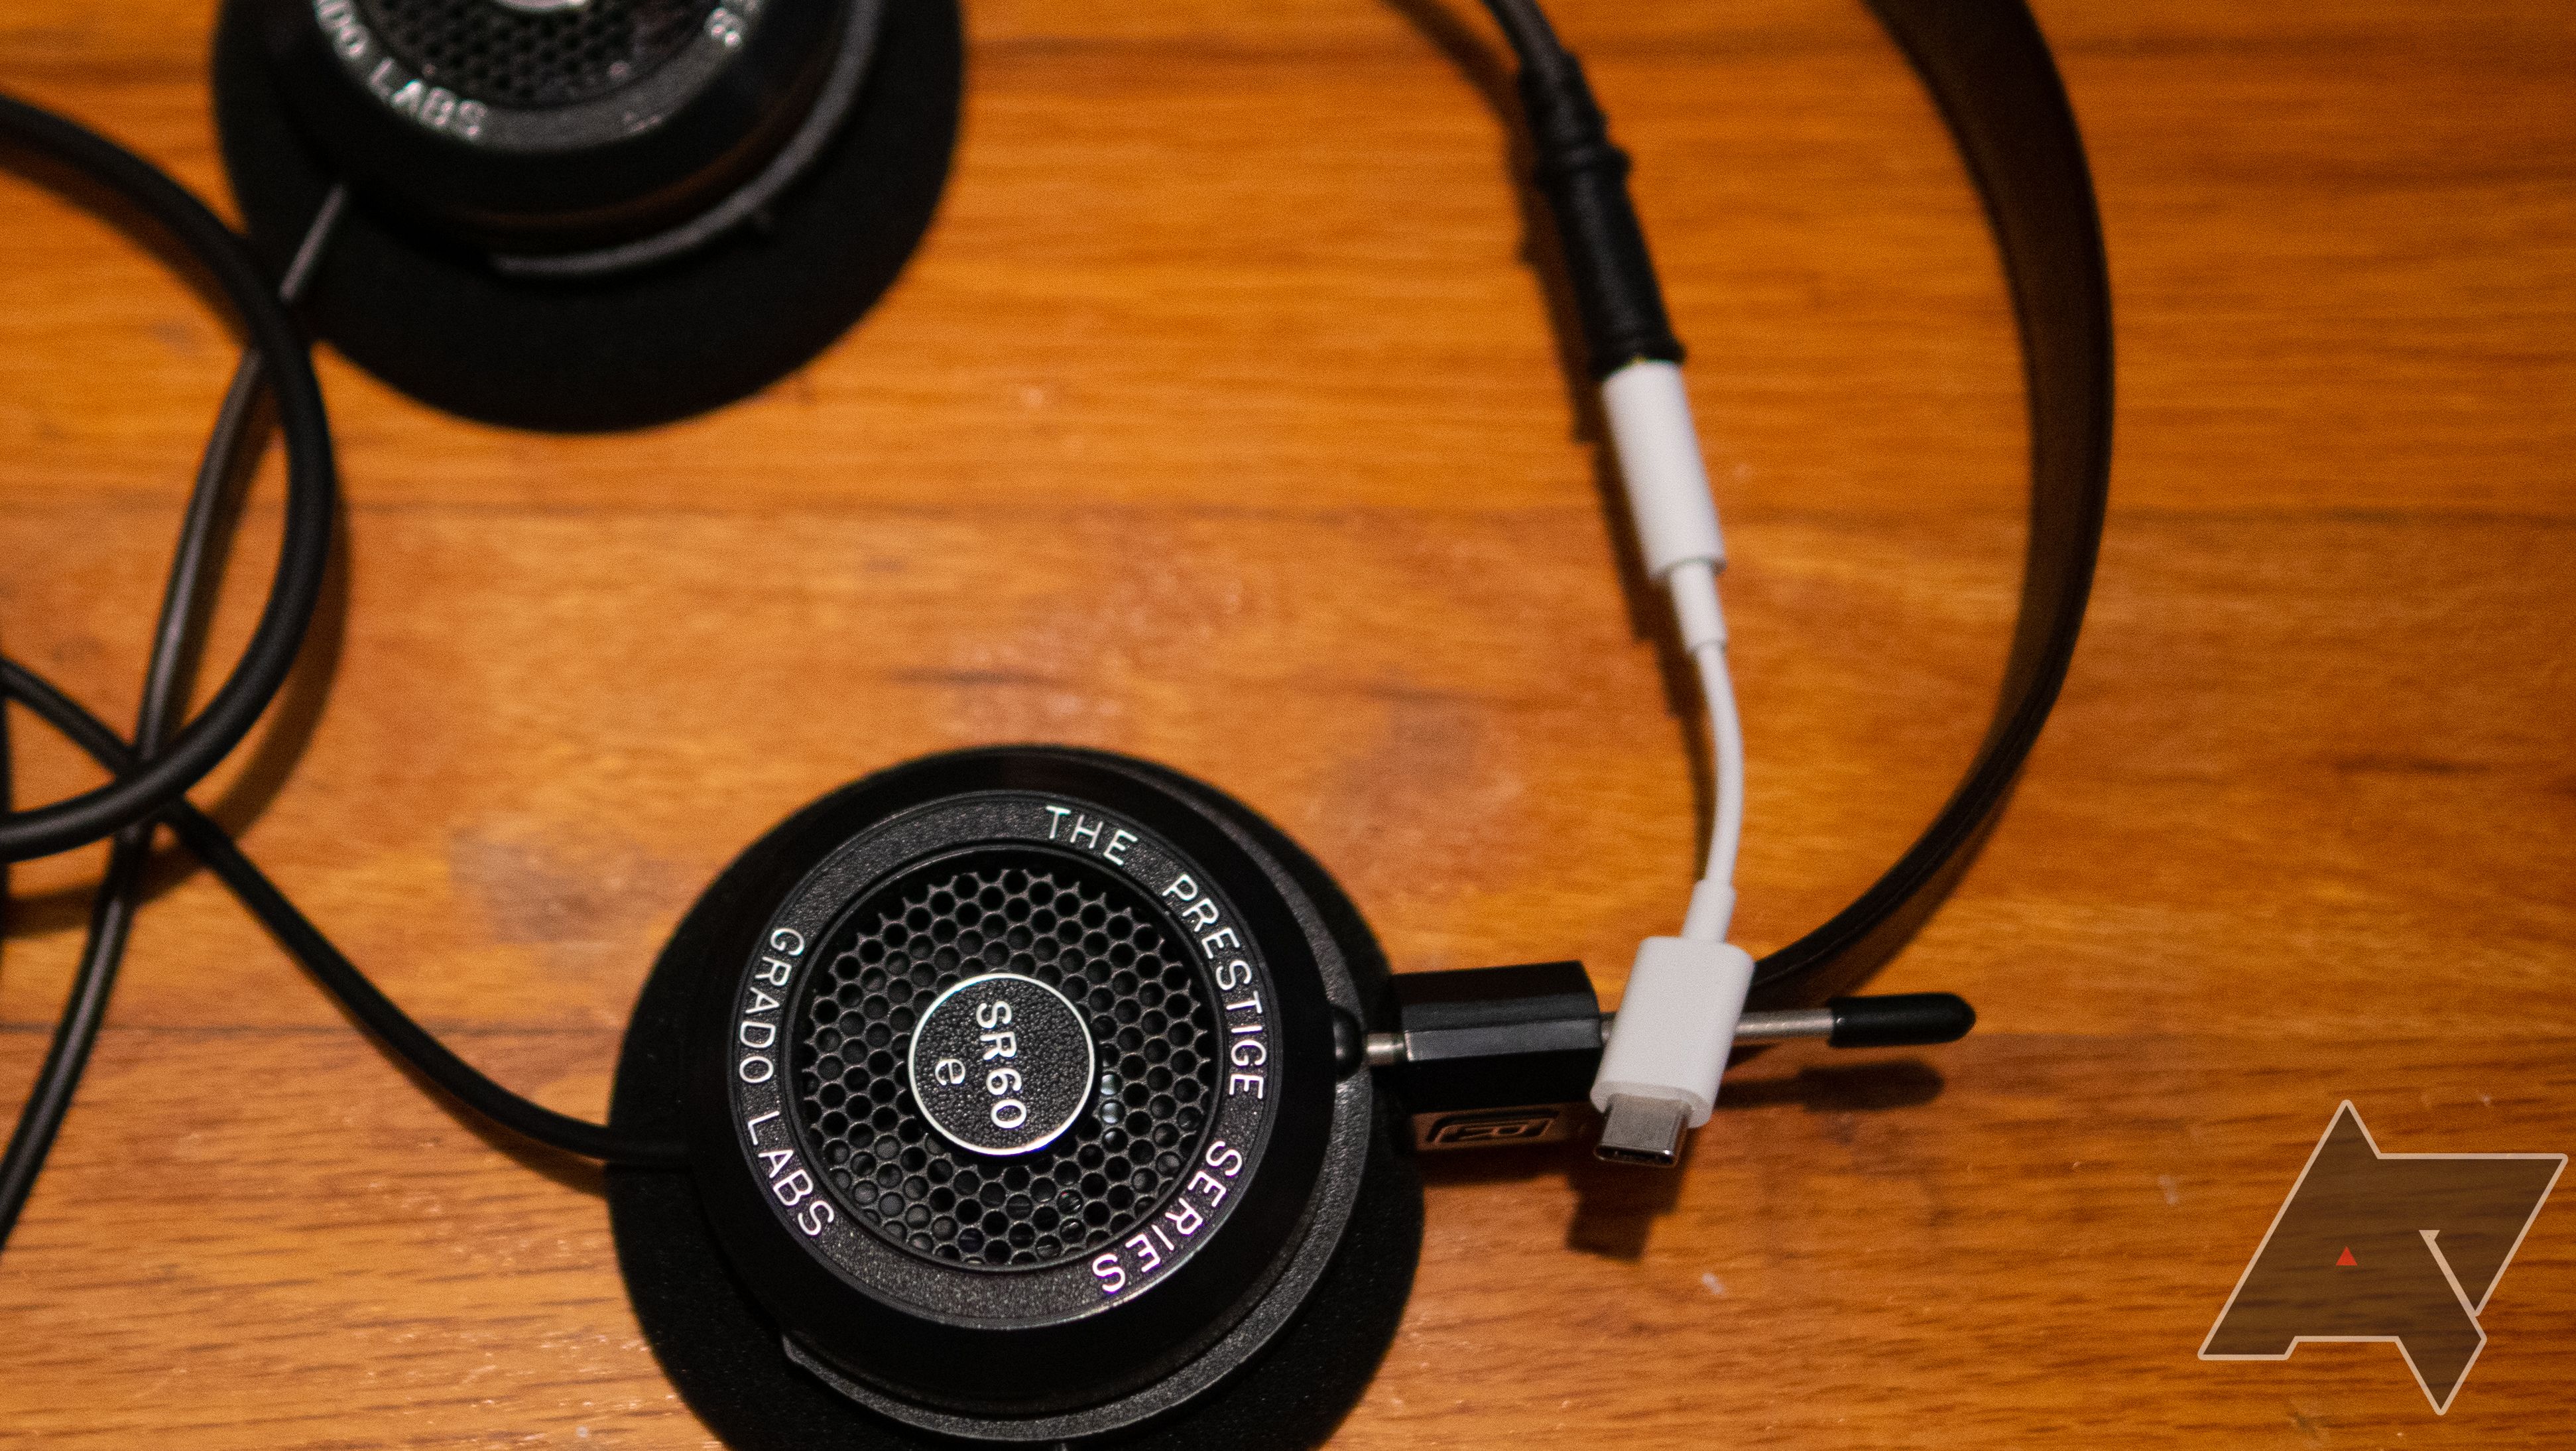 An image of Grado headphones with a USB-C dongle DAC on a wooden desk